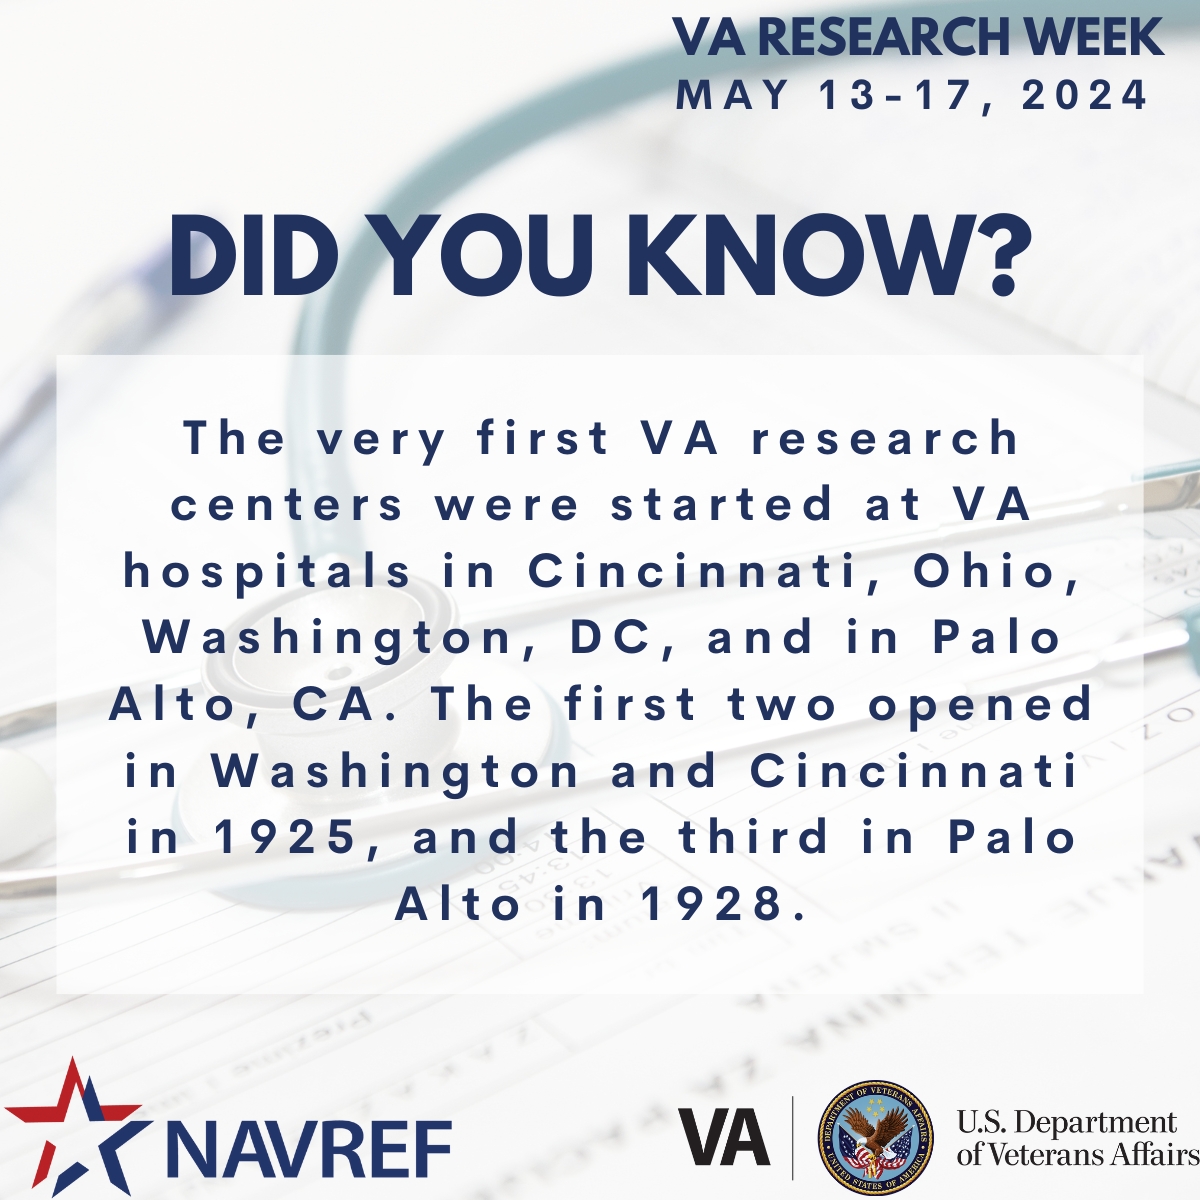 Day 3 of #VAResearchWeek brings us back to the roots! Did you know the very first @VAResearch centers were established in Cincinnati, Ohio, Washington, DC, and Palo Alto, CA? Washington and Cincinnati led the way in 1925, followed by Palo Alto in 1928.